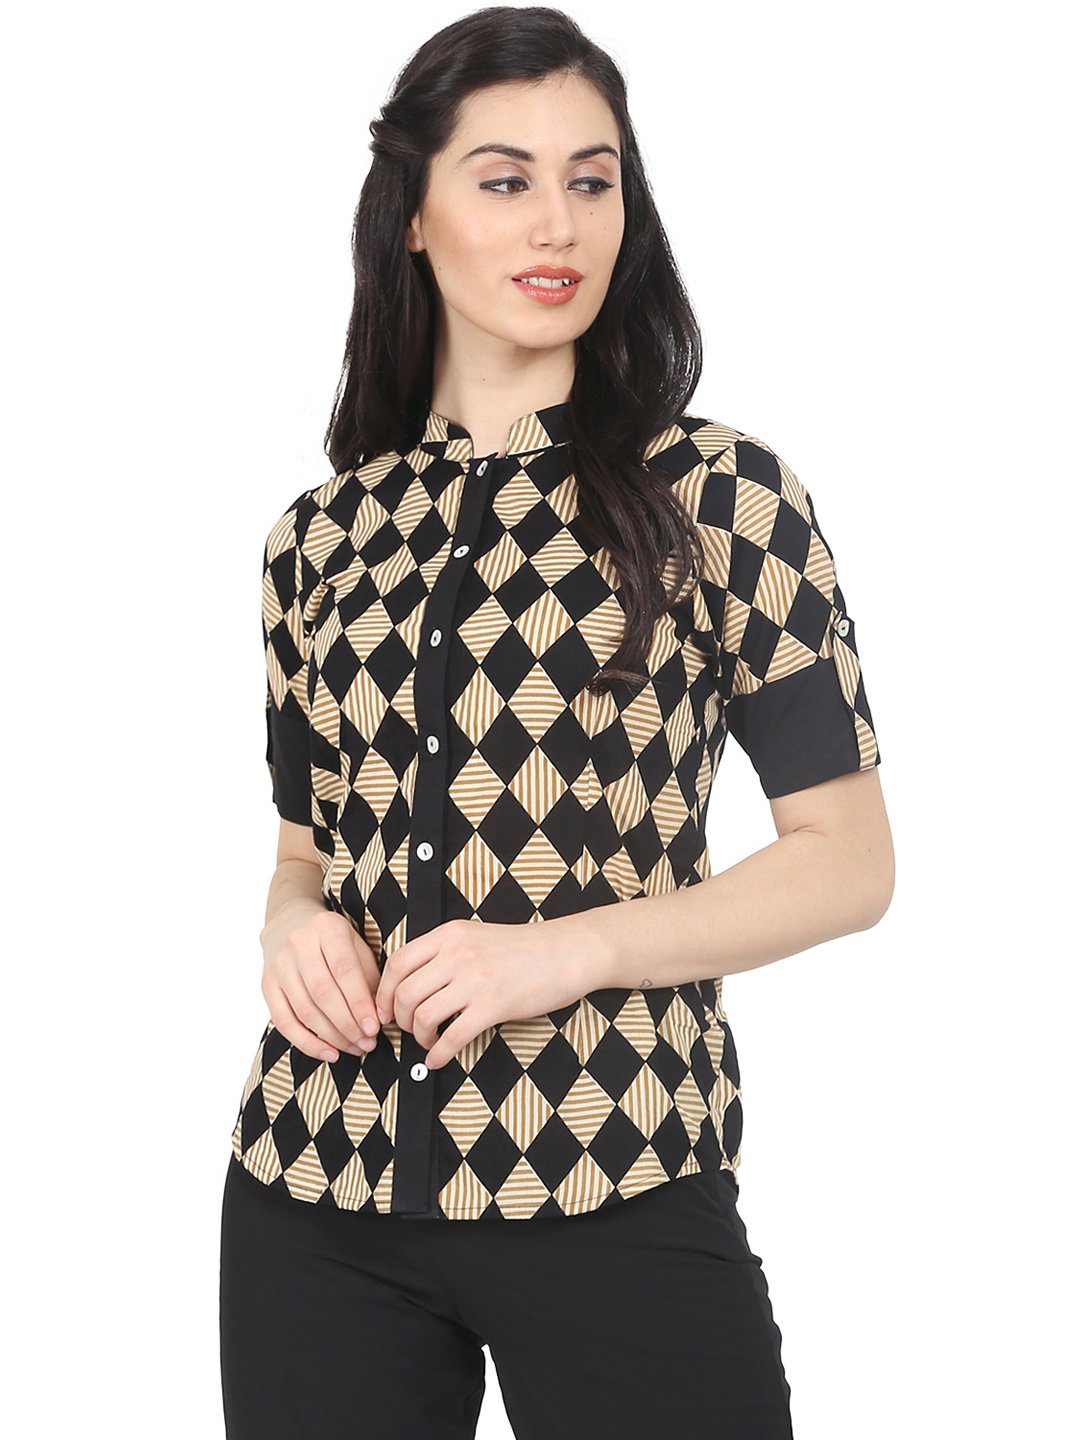 Women's Black & Beige Slim Fit Checked Casual Shirt - Nayo Clothing